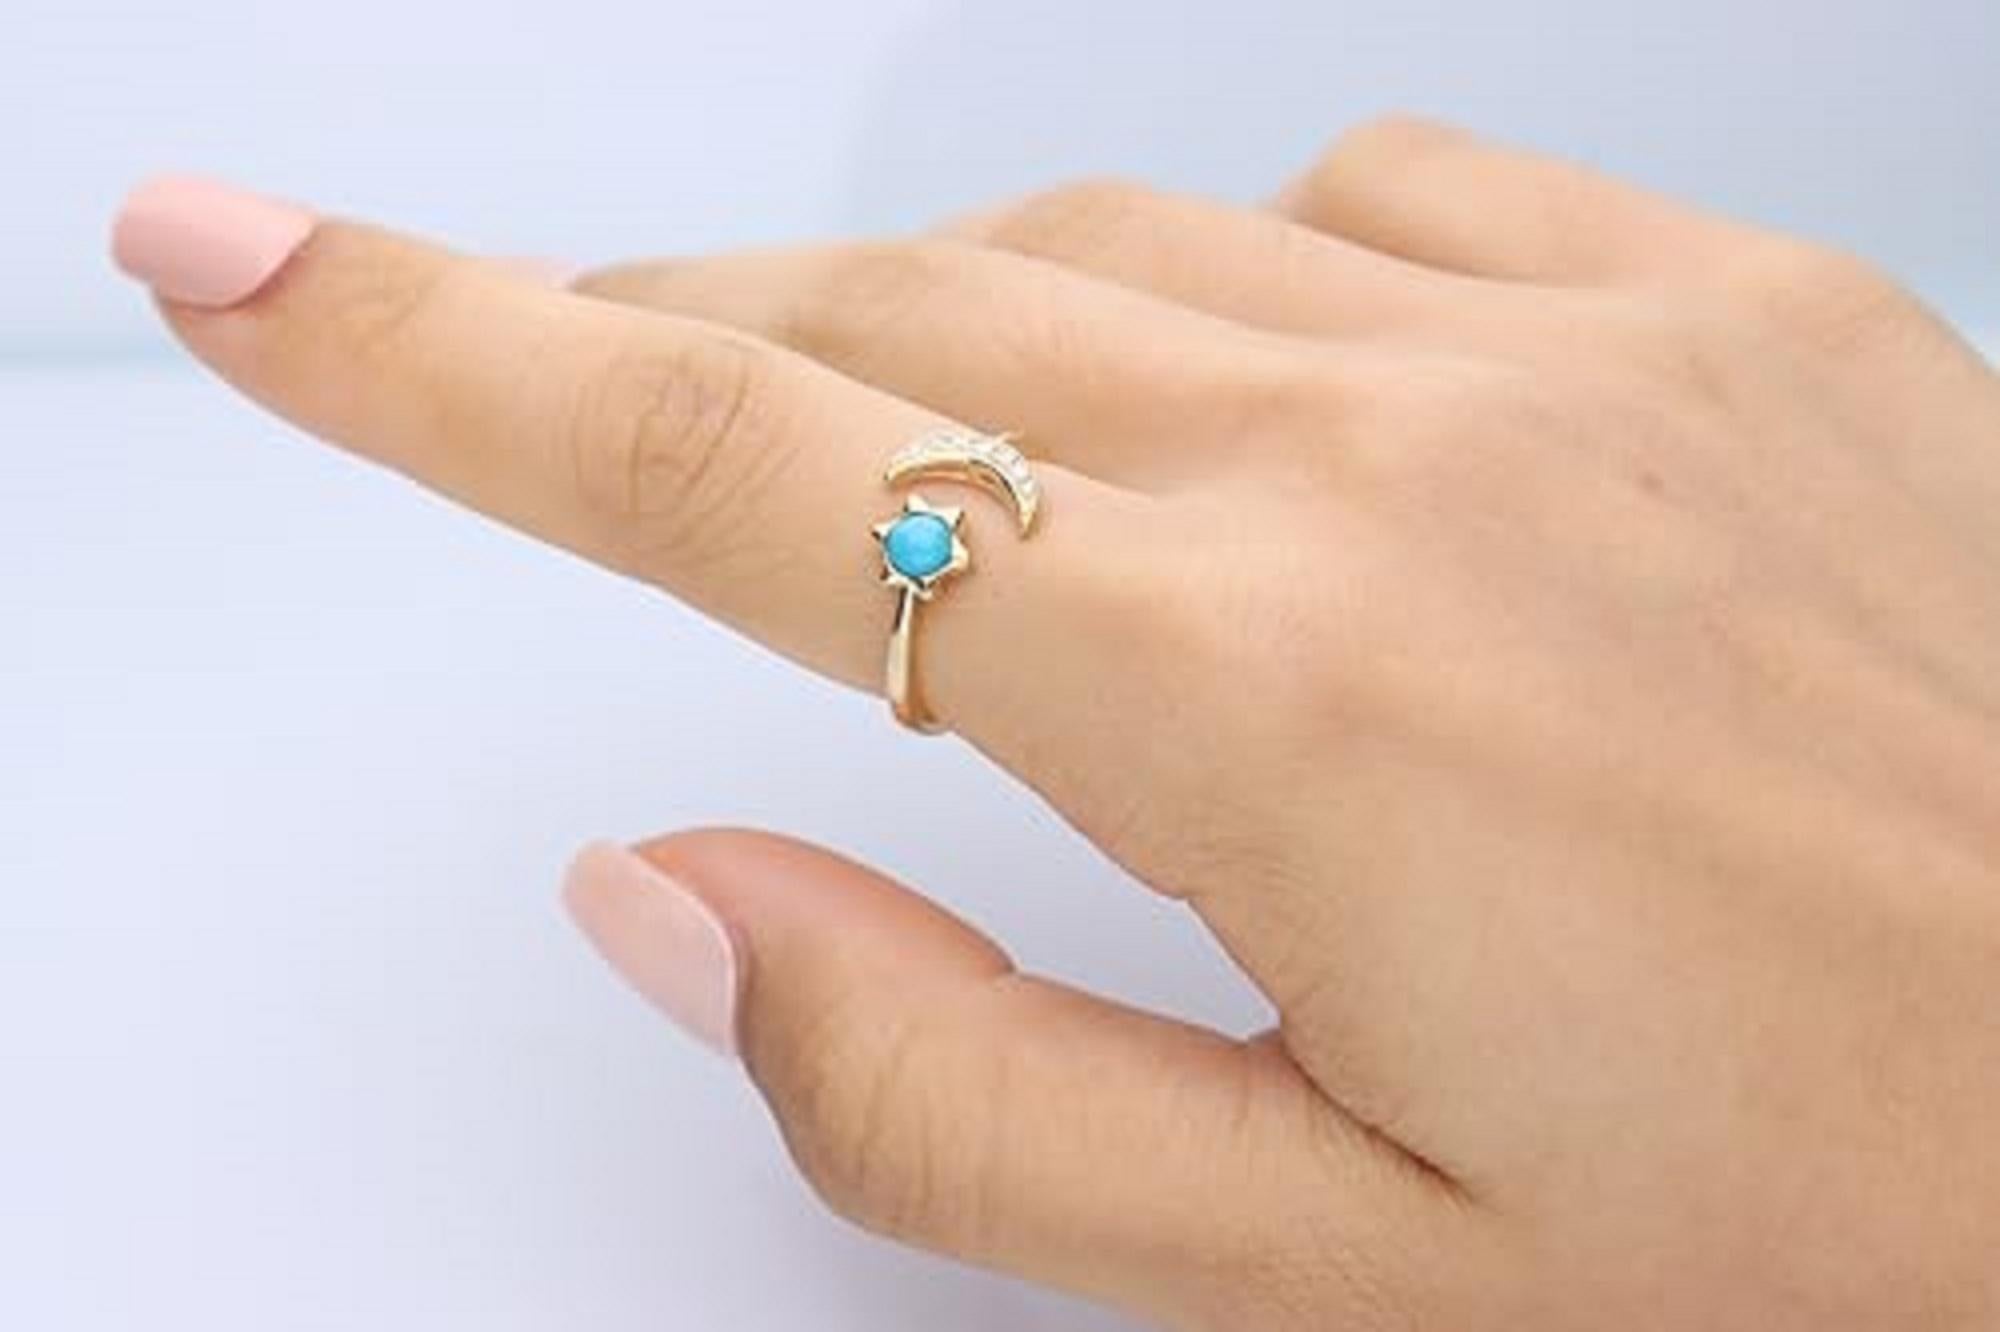 Decorate yourself in elegance with this Ring is crafted from 10-karat Yellow gold 4.0 mm Round-cut Turquoise (1 pcs) 0.24 carat and round-cut white diamond (7 pcs) 0.06 carat. This Ring is weight 1.84 grams. This delicate Ring is polished to a high